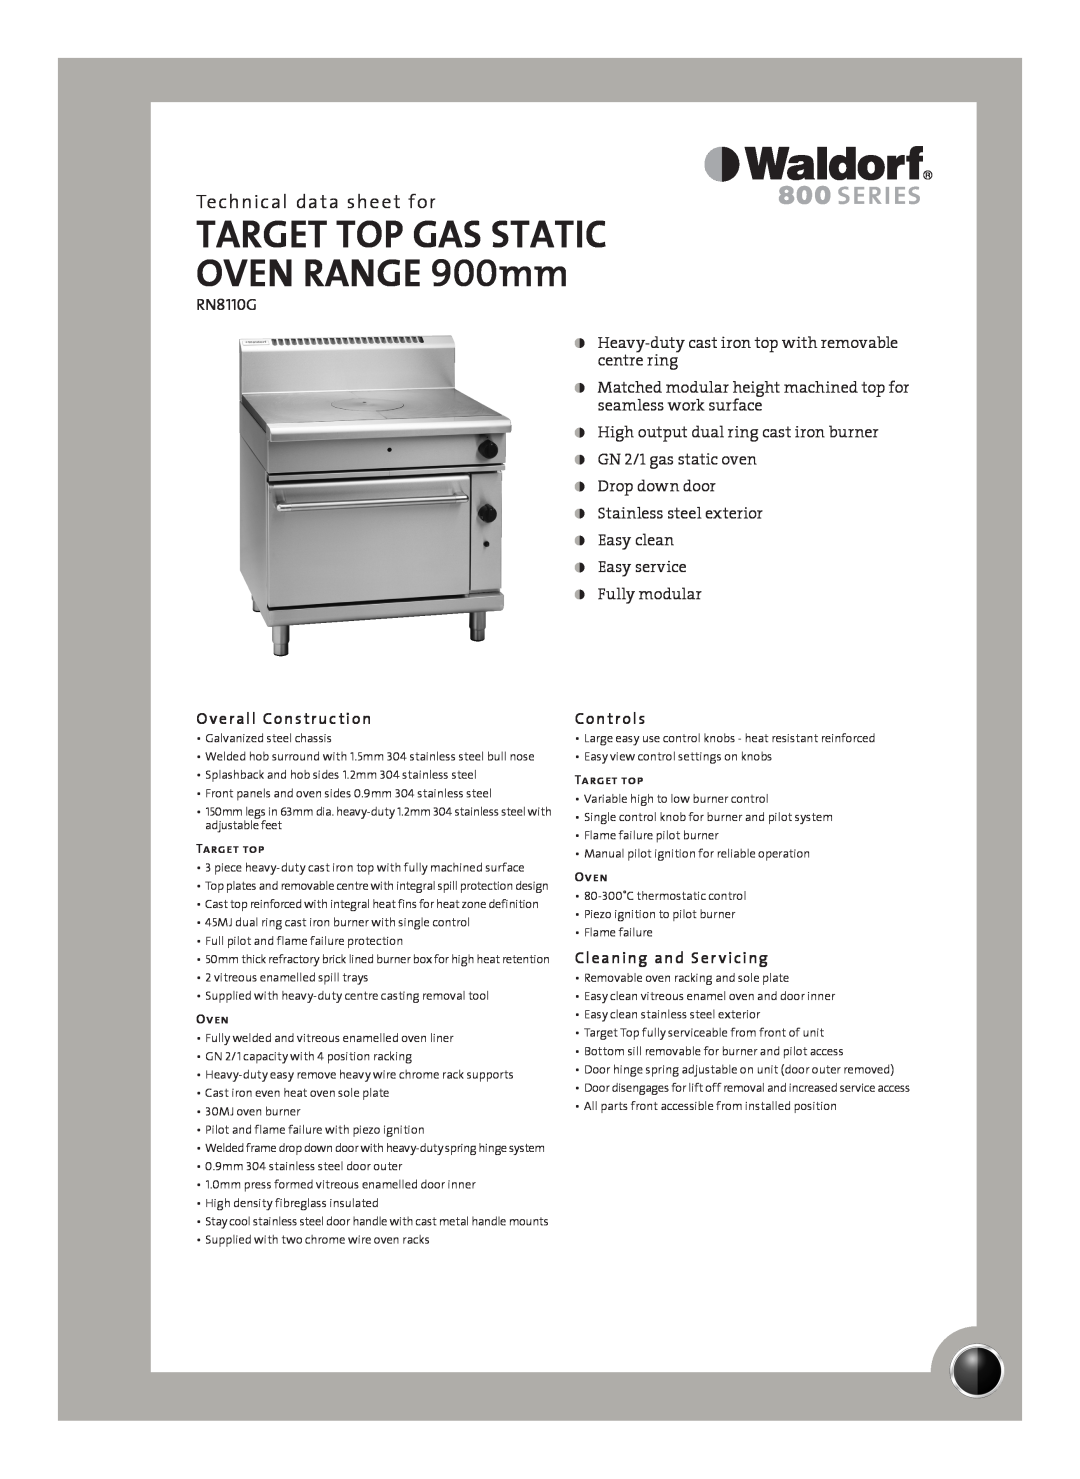 Moffat RN8110G manual Technical data sheet for, Overall Construction, Controls, Cleaning and Ser vicing, Target top, Oven 